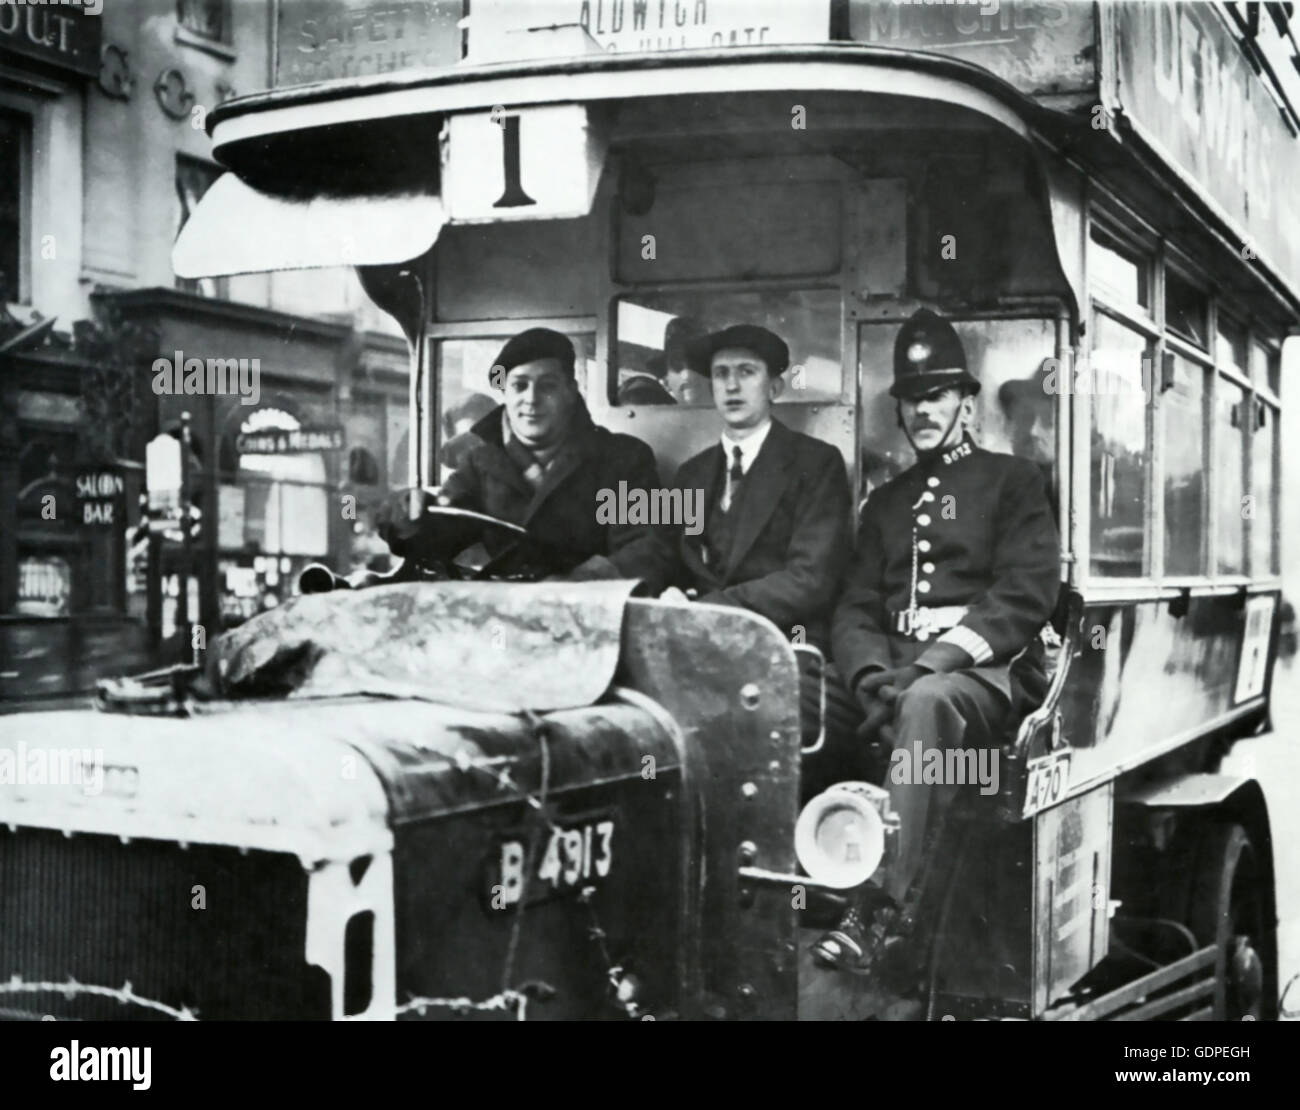 GENERAL STRIKE 1926 A policeman acts as guard for two bus drivers who defied the strike as they make their way along Oxford Street, London. Photo: GLC Archive Stock Photo